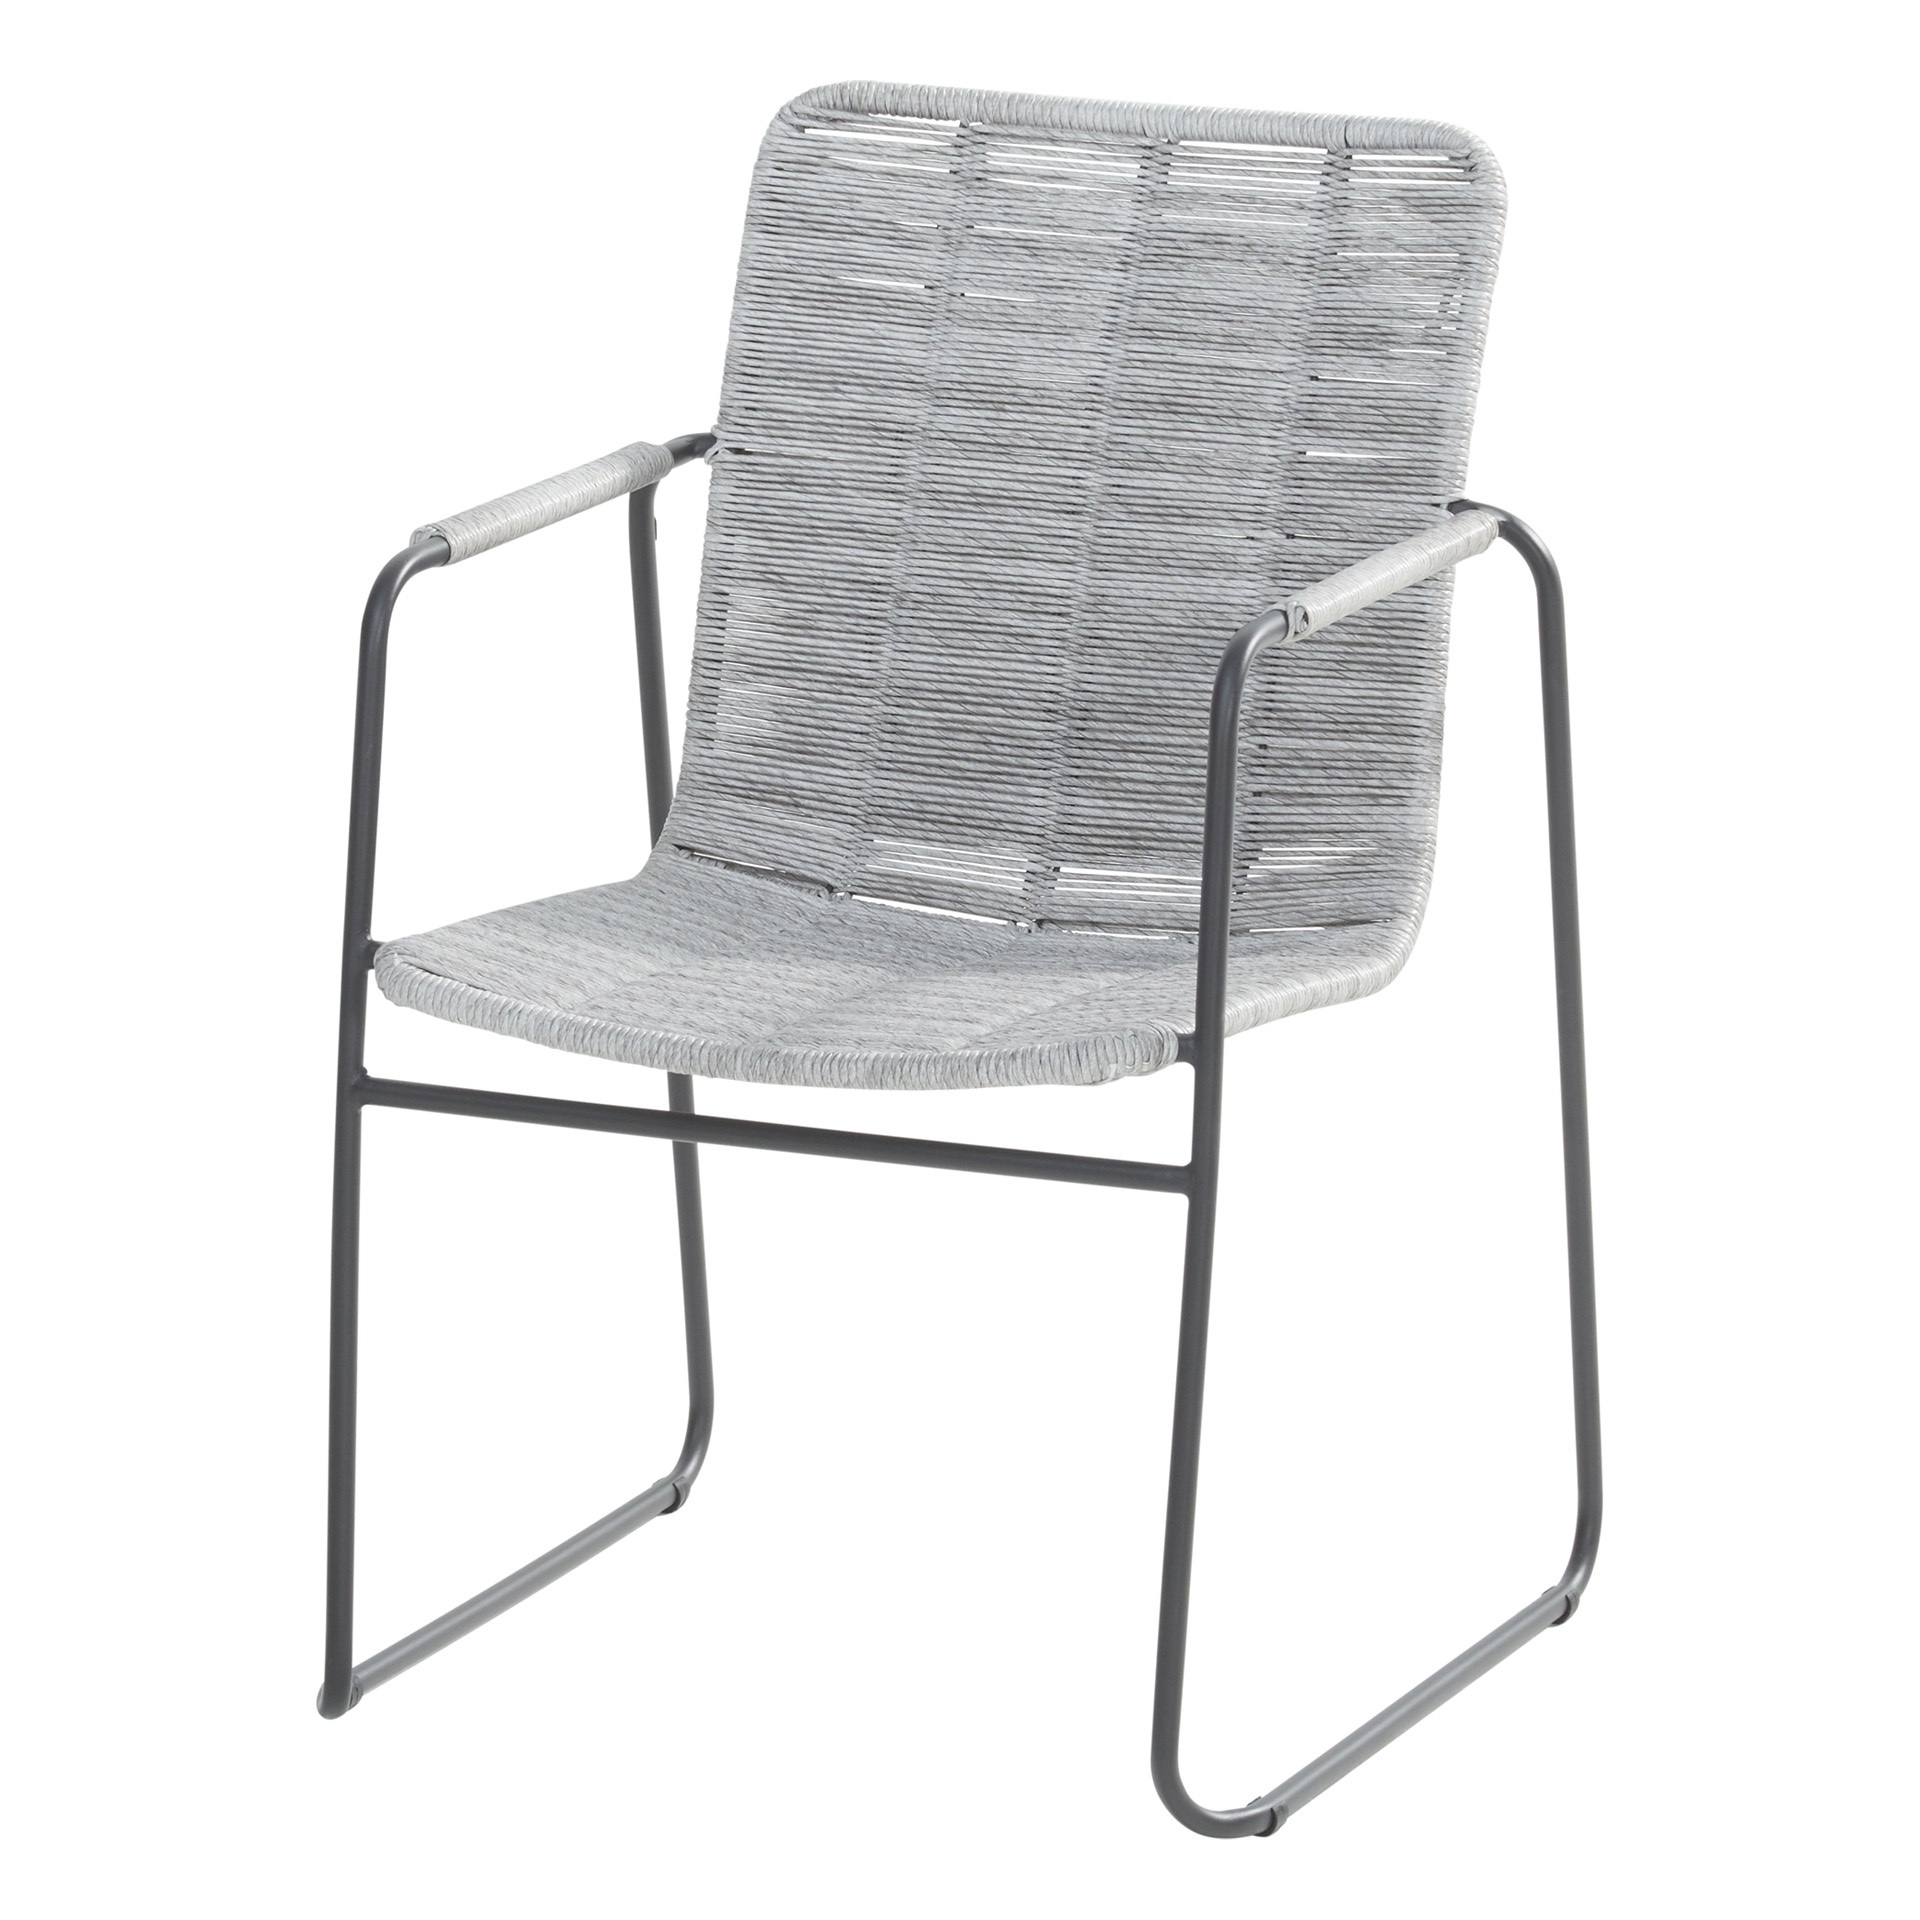 Palma Stacking chair Antracite with light grey